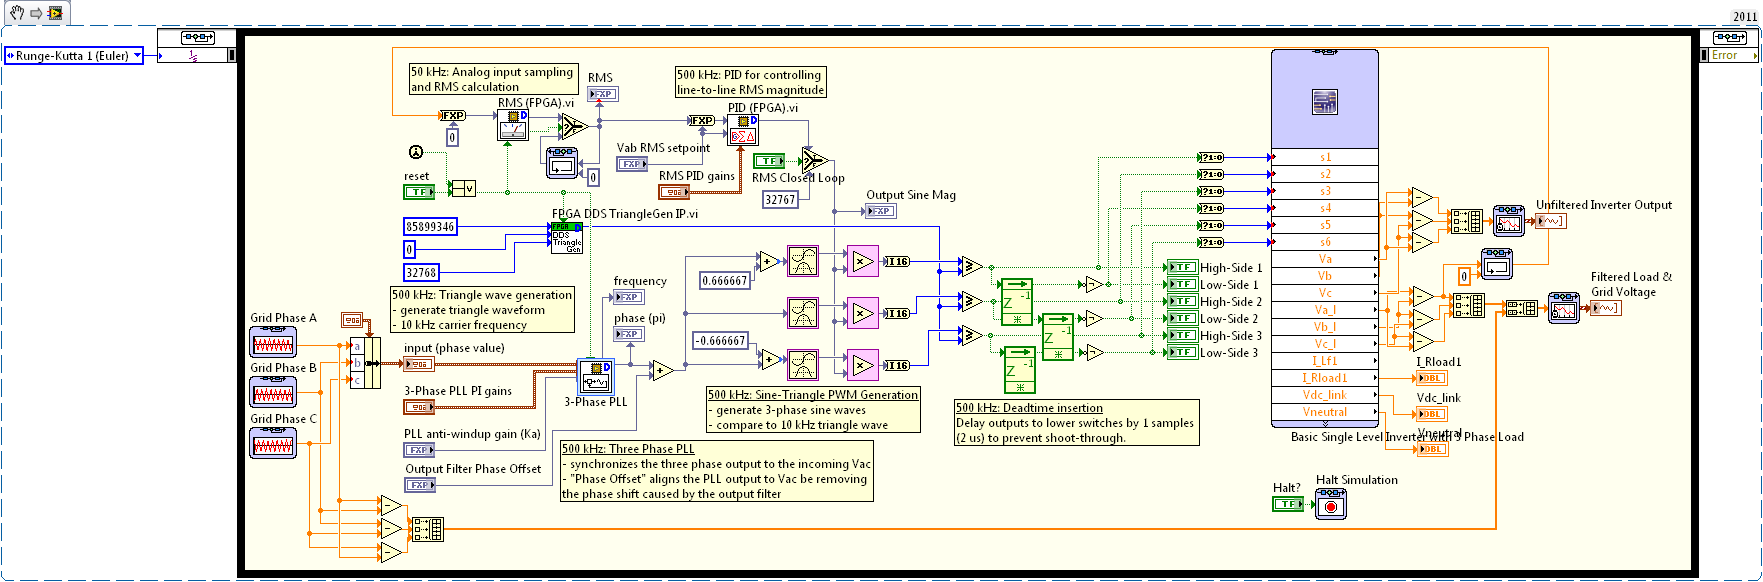 Complete System Simulation of a 3-Phase Inverter Using NI Multisim and  LabVIEW - NI Community